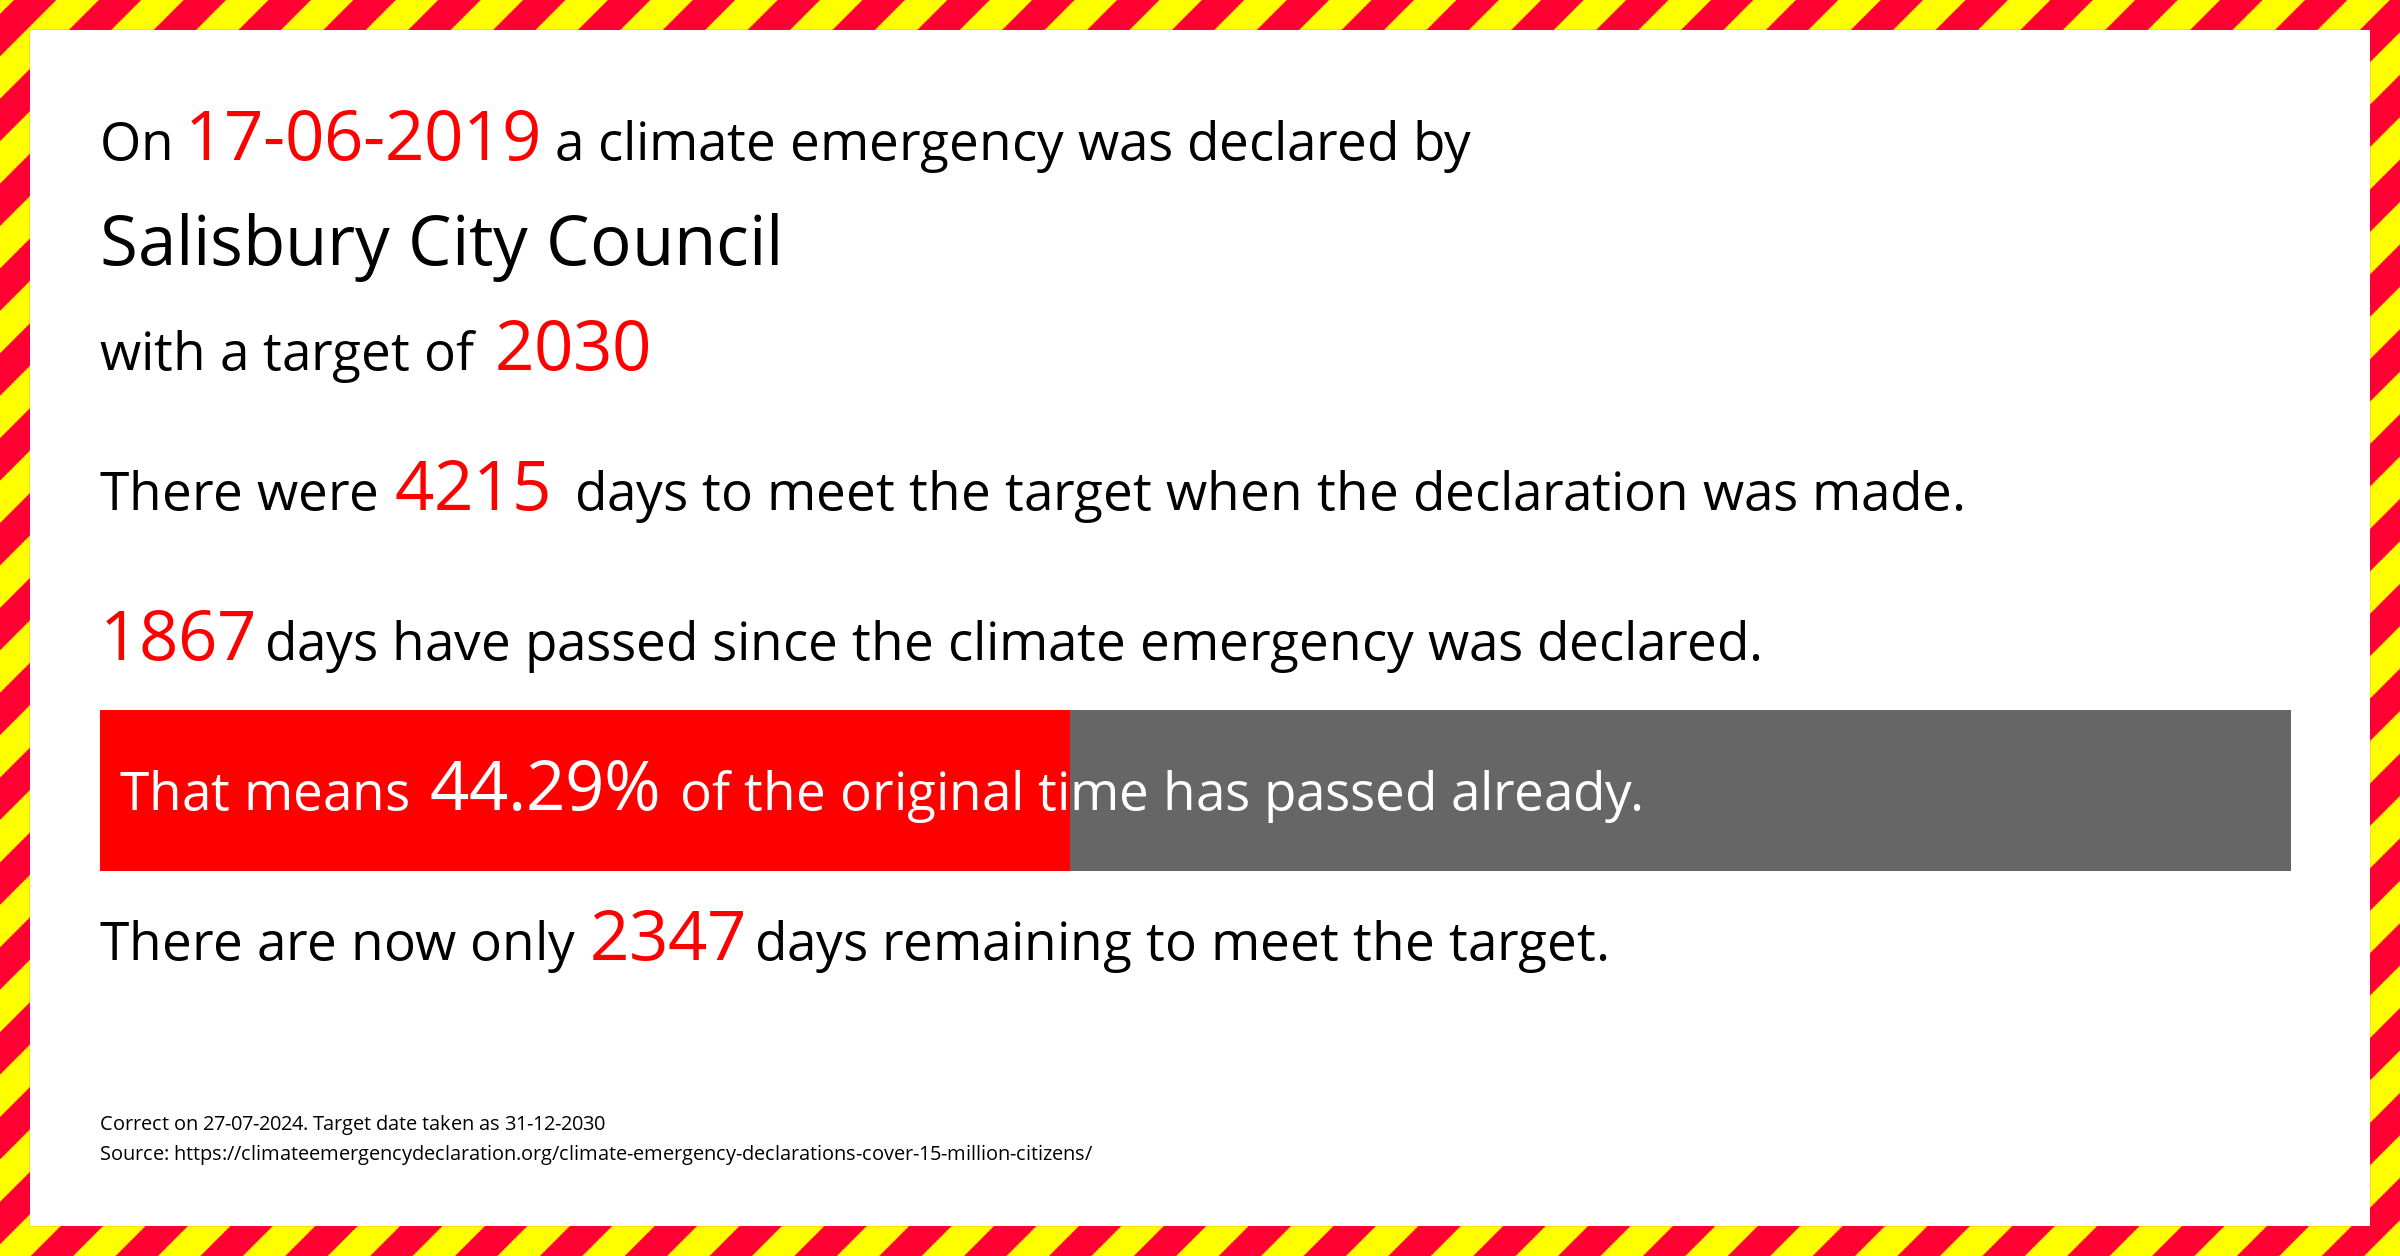 Salisbury City Council declared a Climate emergency on Monday 17th June 2019, with a target of 2030.